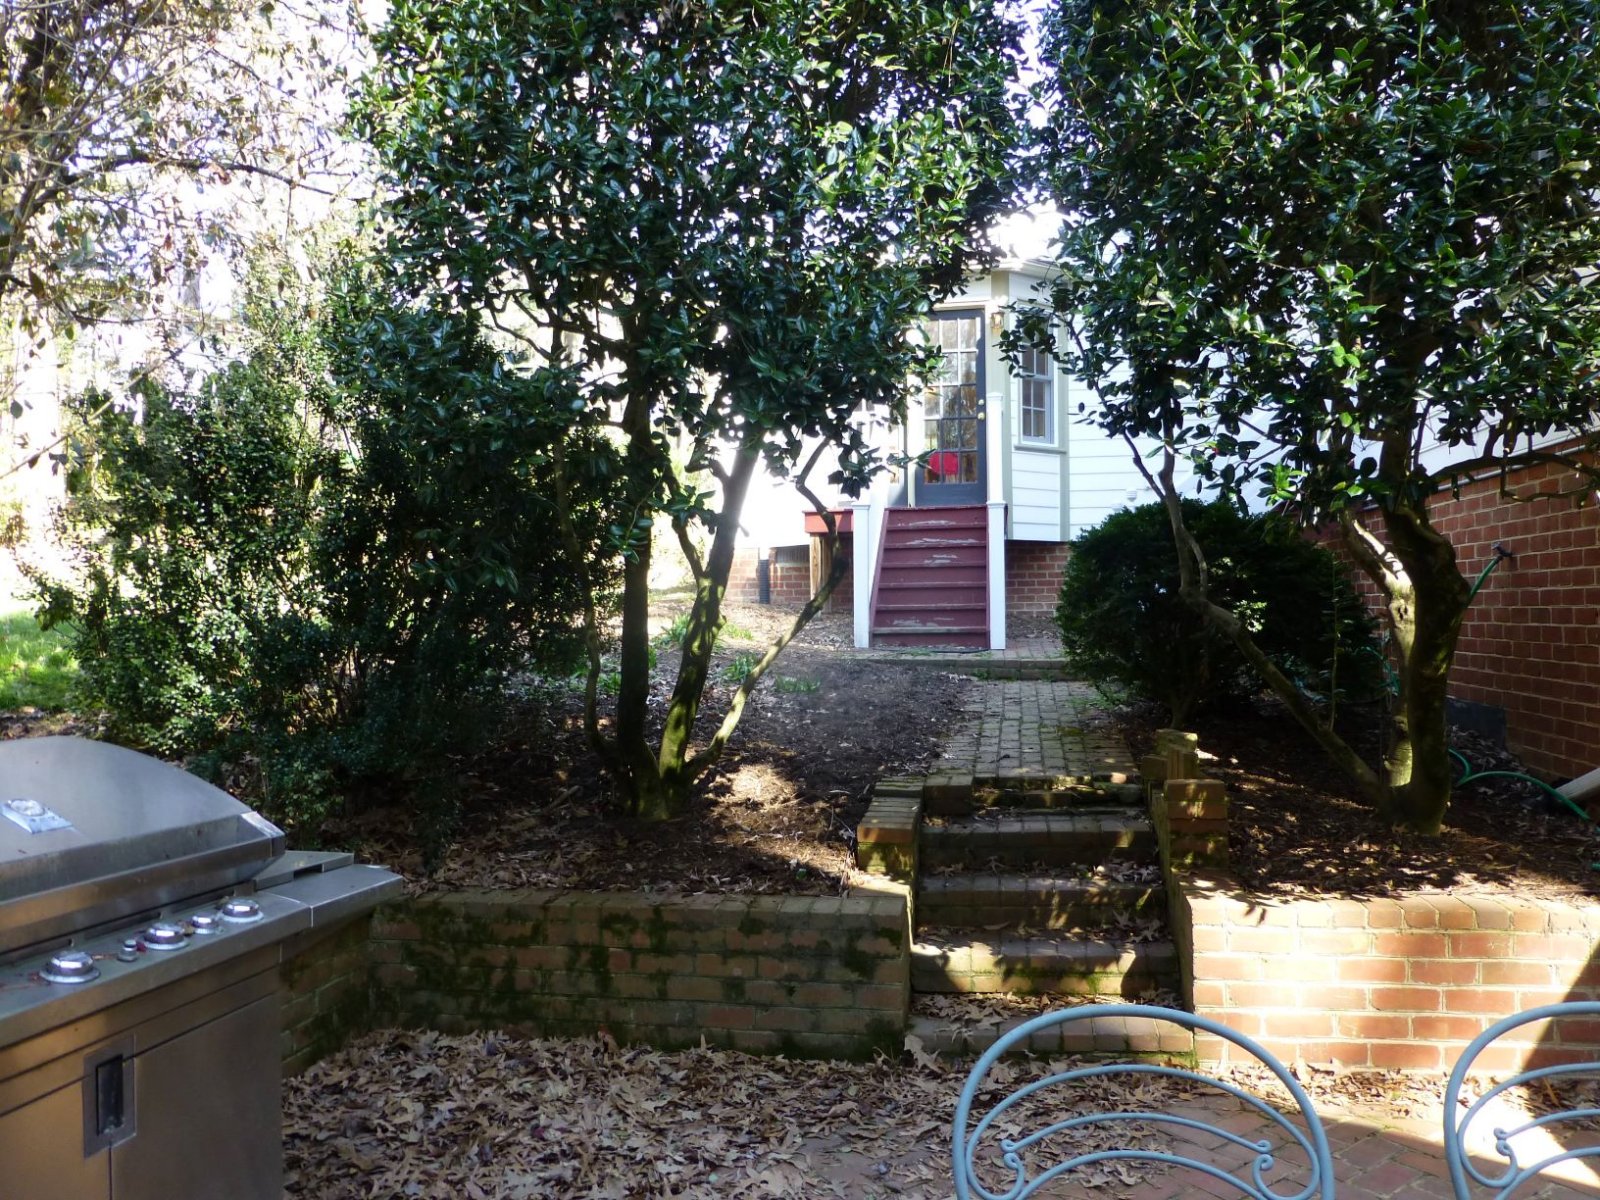 Before: Limited usable outdoor living space and poor access. : Before/After : Richmond VA Landscape Designer: Gardens by Monit, LLC: Monit Rosendale landscape designer Richmond and Charlottesville Virginia and Fredericksburg Virginia and Williamsburg Virginia